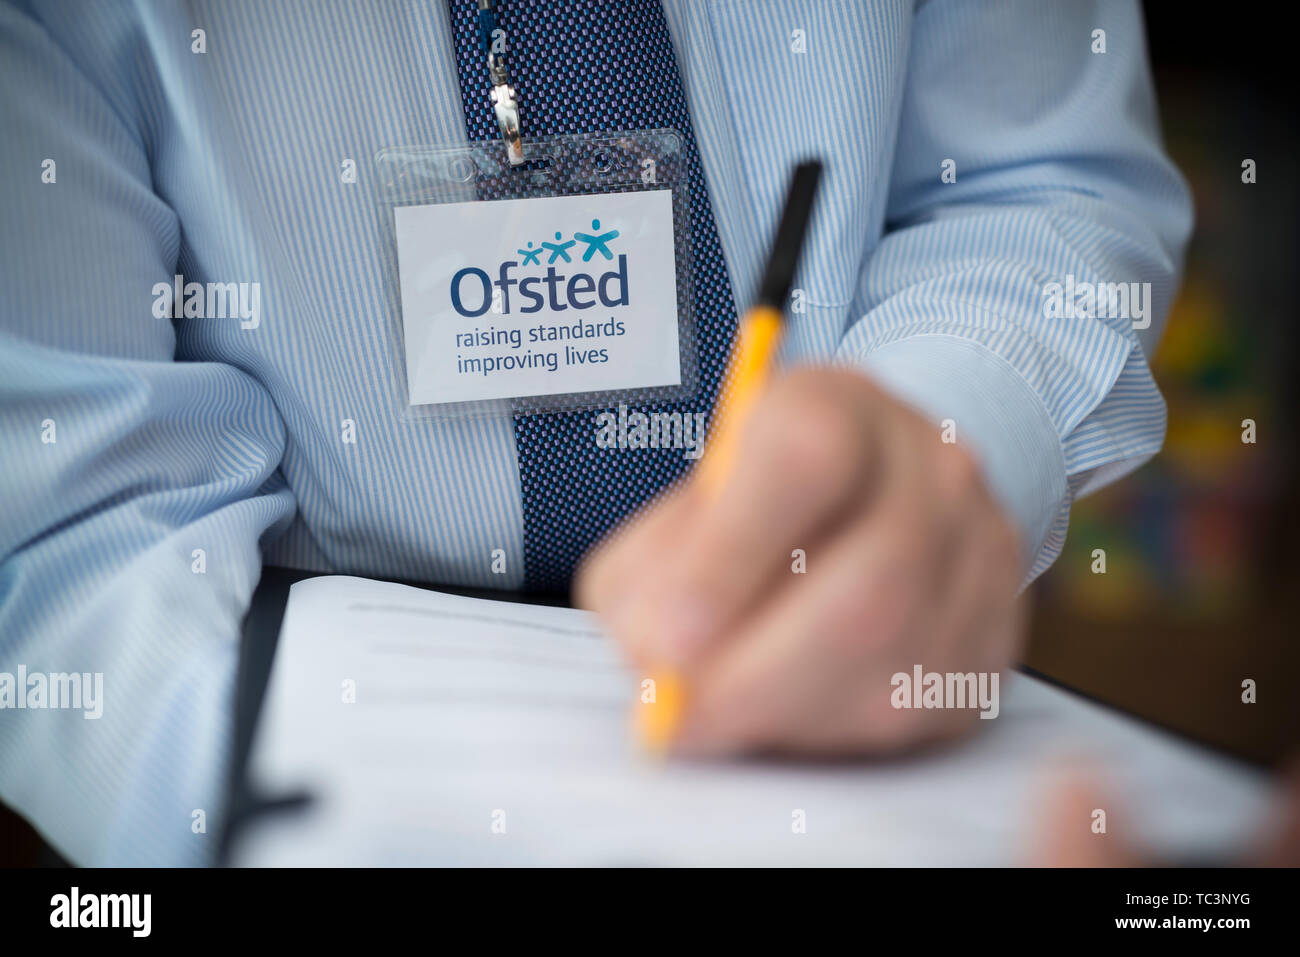 A man dressed in a shirt and tie with an Ofsted lanyard appears to be compiling a report using a pen and clipboard. (Editorial use only) Stock Photo